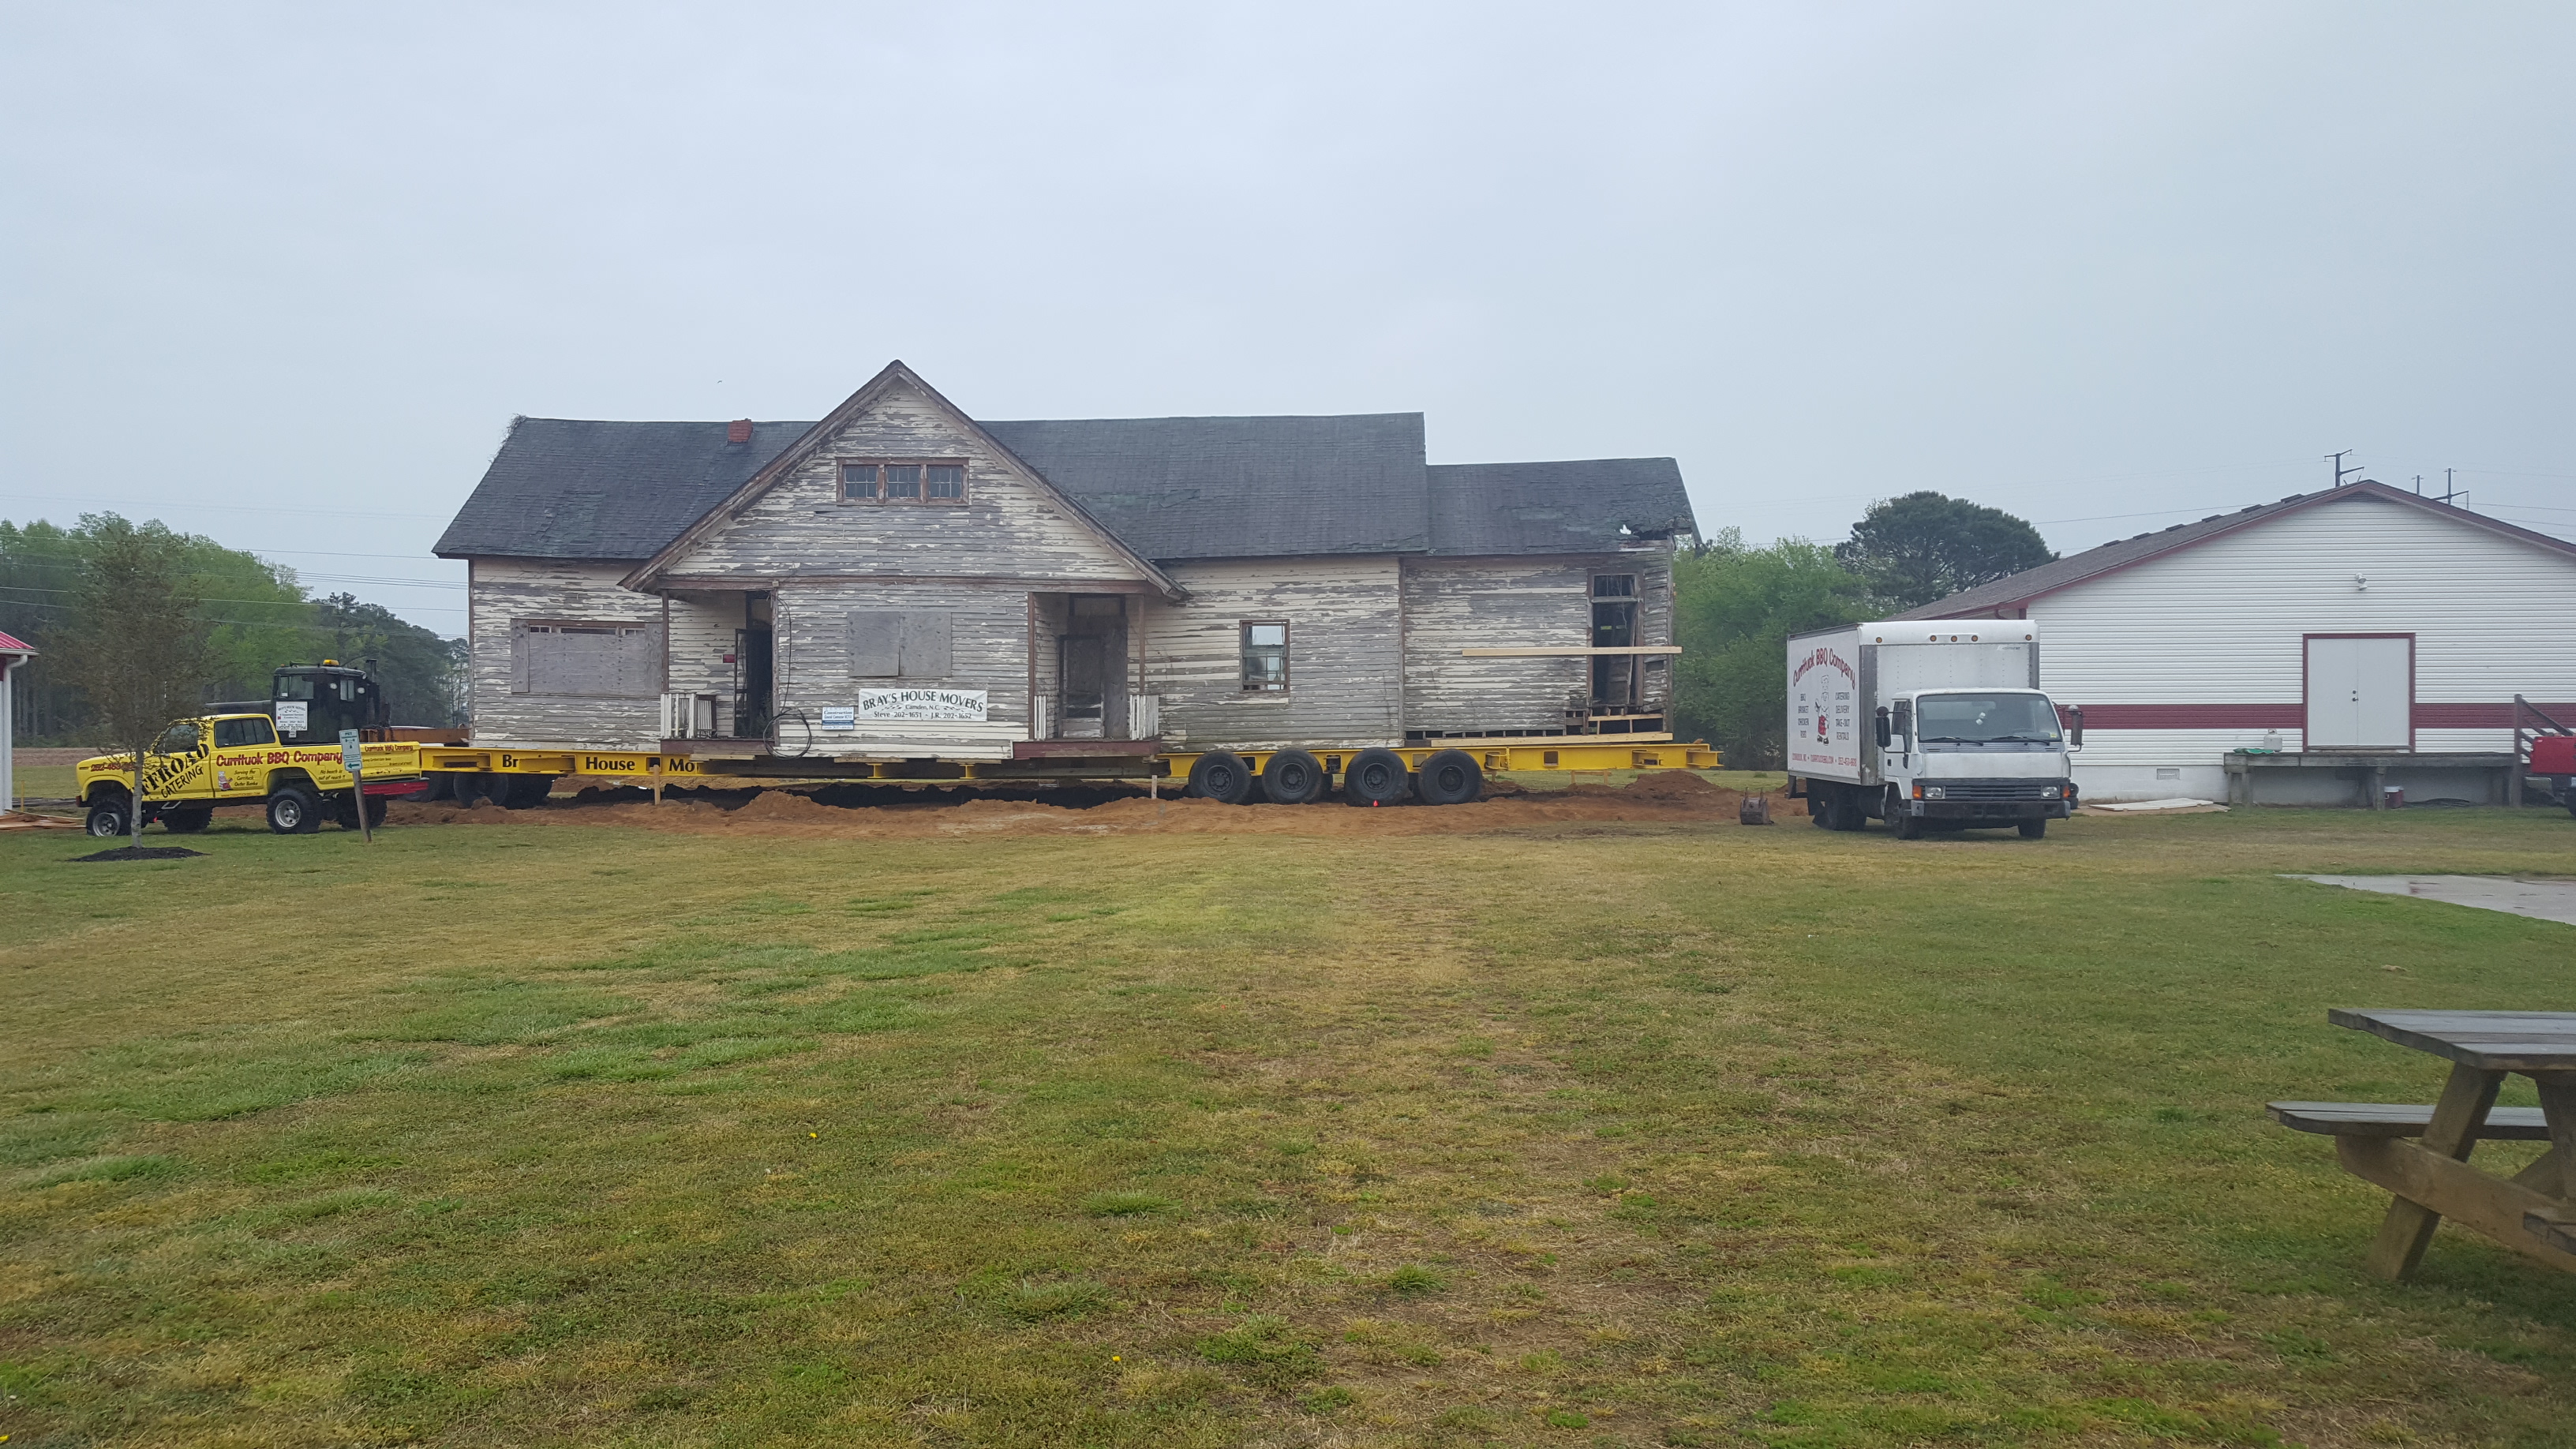 The Rosenwald School house sits perfectly today in its new location next to Currituck BBQ Restaurant. The school will be restored back to its original glory and will be a African-American History Museum as well as a Old Country Store.